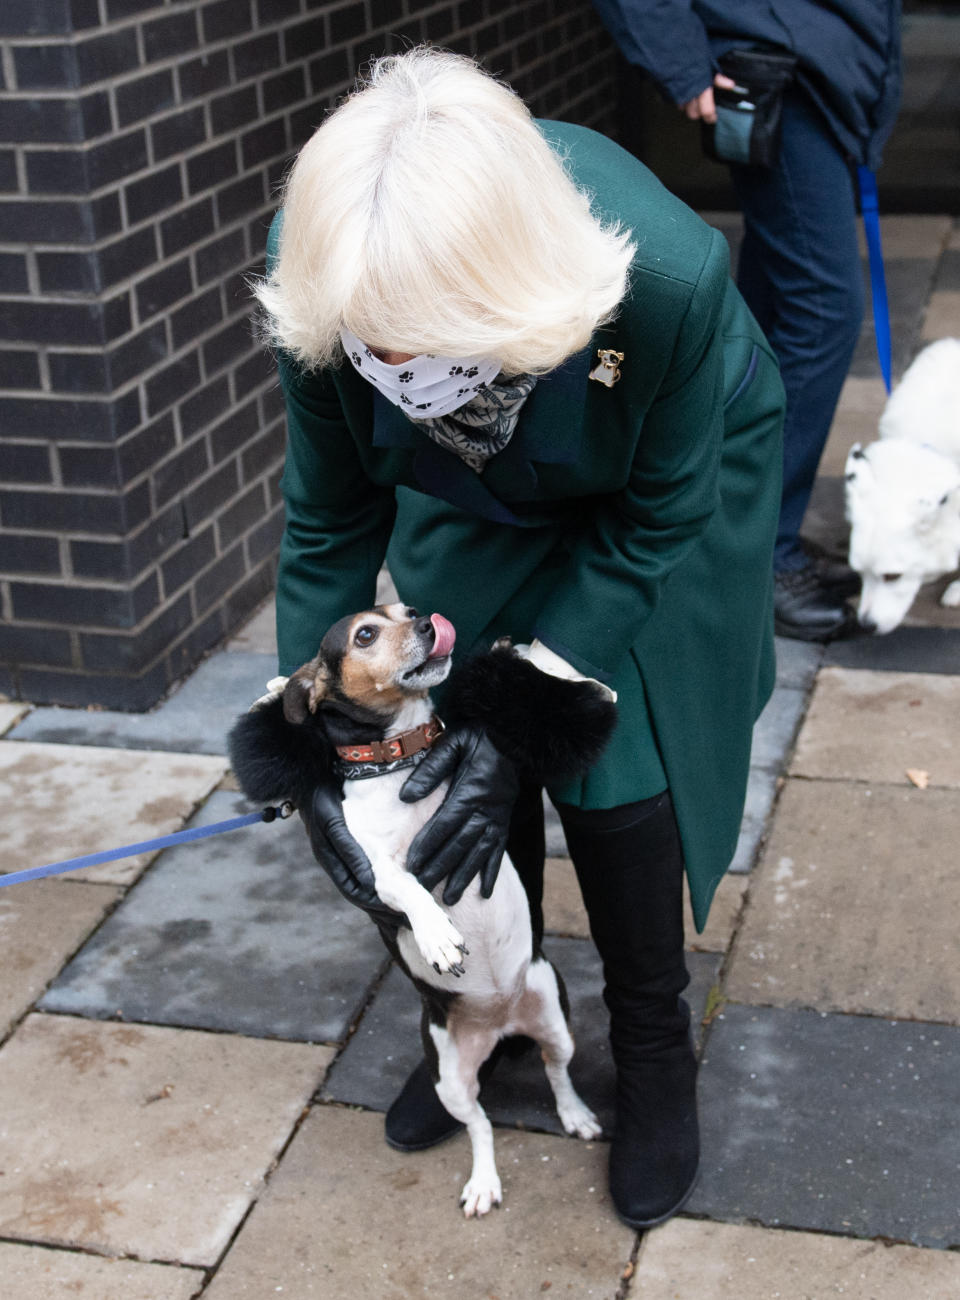 WINDSOR, ENGLAND - DECEMBER 09: Camilla, Duchess of Cornwall with her dog Beth as she visits Battersea Dogs Home in Windsor on December 09, 2020 in Windsor, United Kingdom. (Photo by Samir Hussein/WireImage)